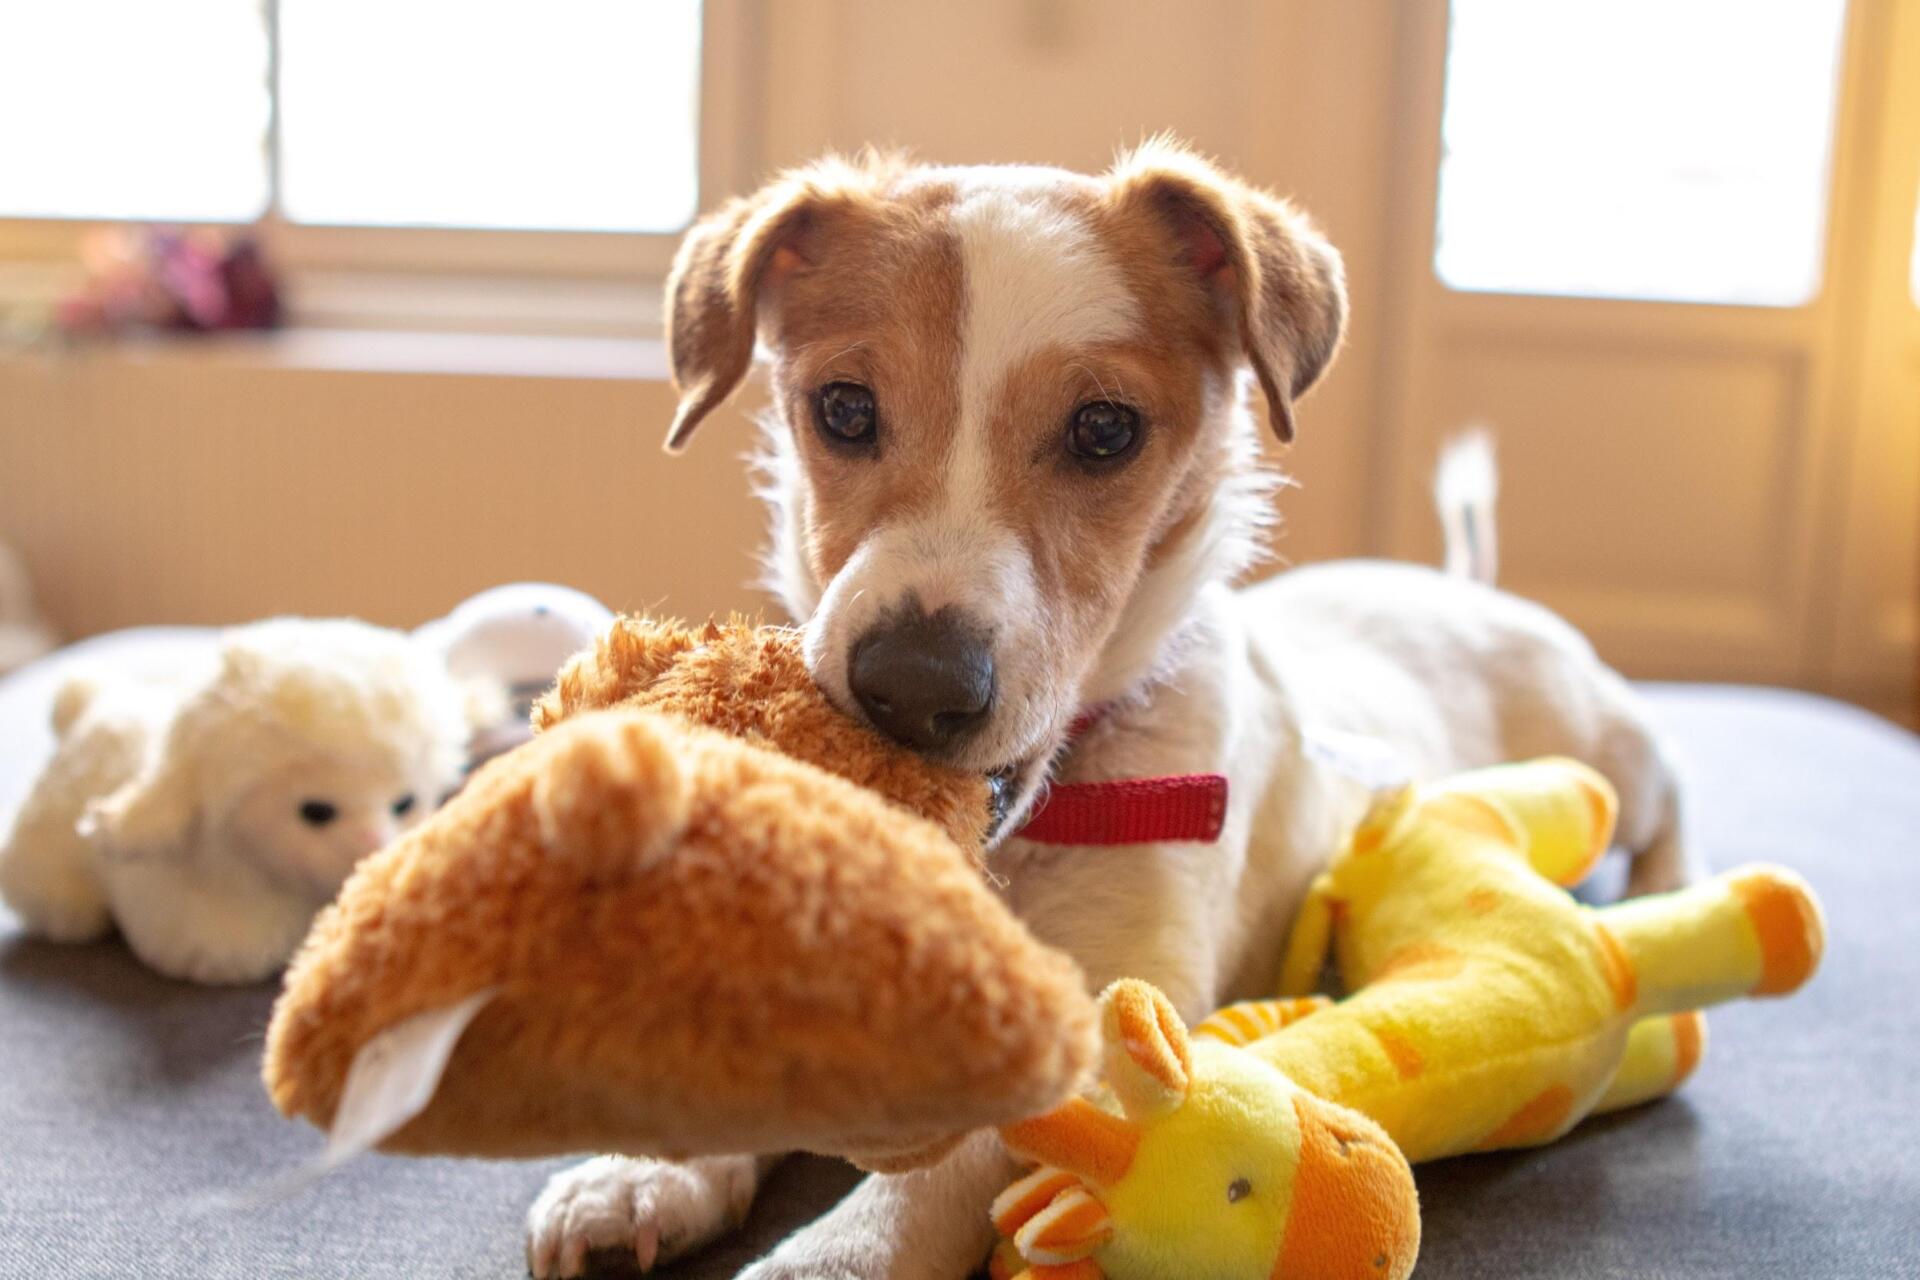 Choosing the right toys for your dog